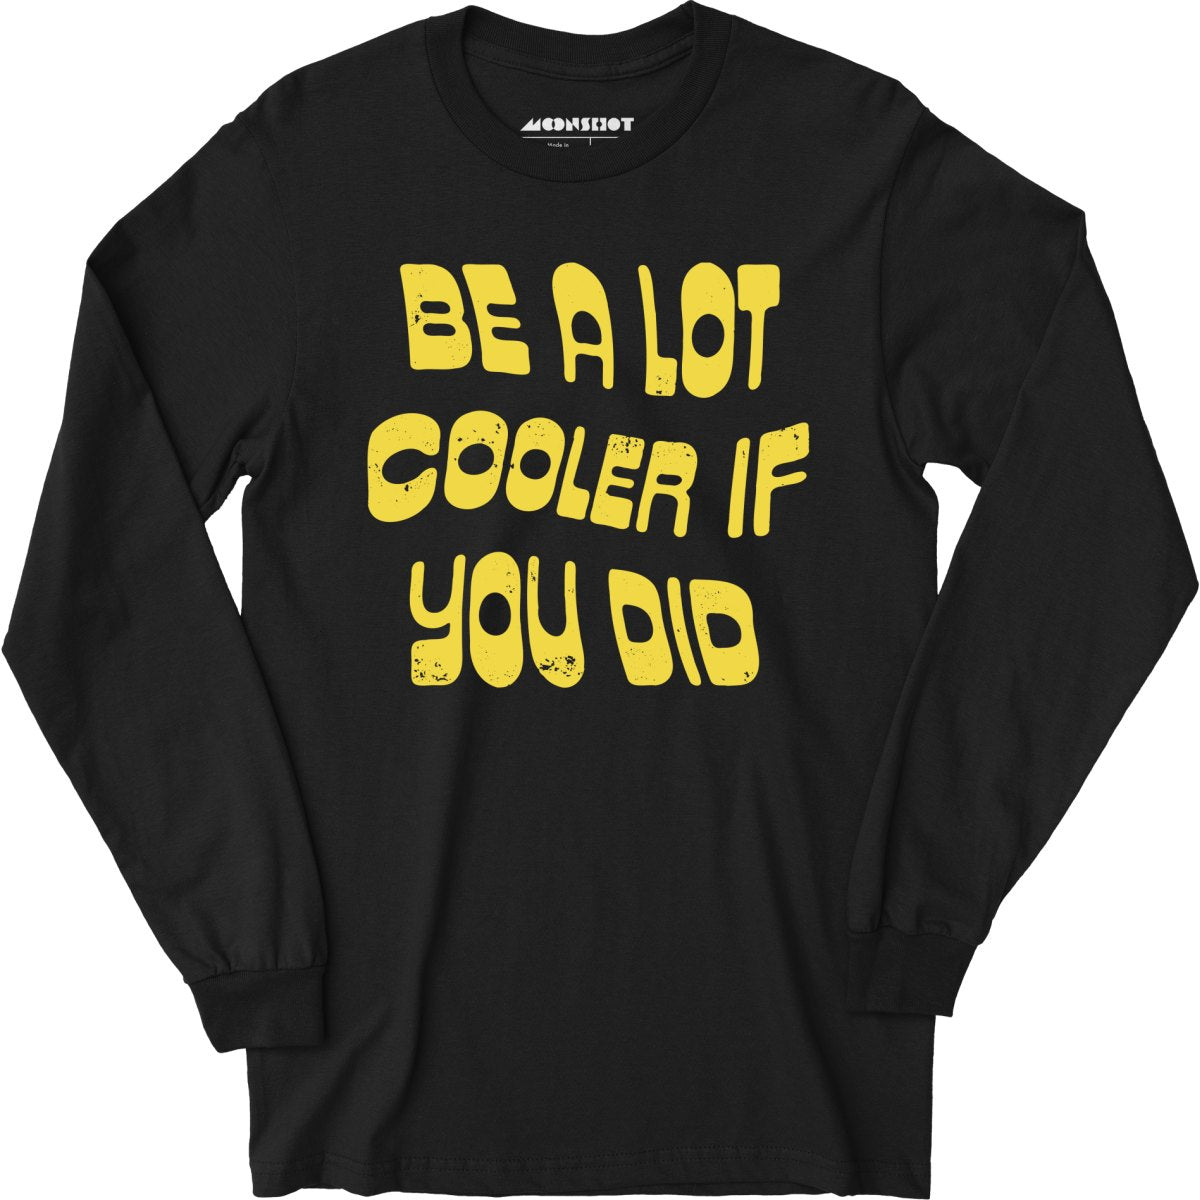 Be a Lot Cooler if You Did - Long Sleeve T-Shirt